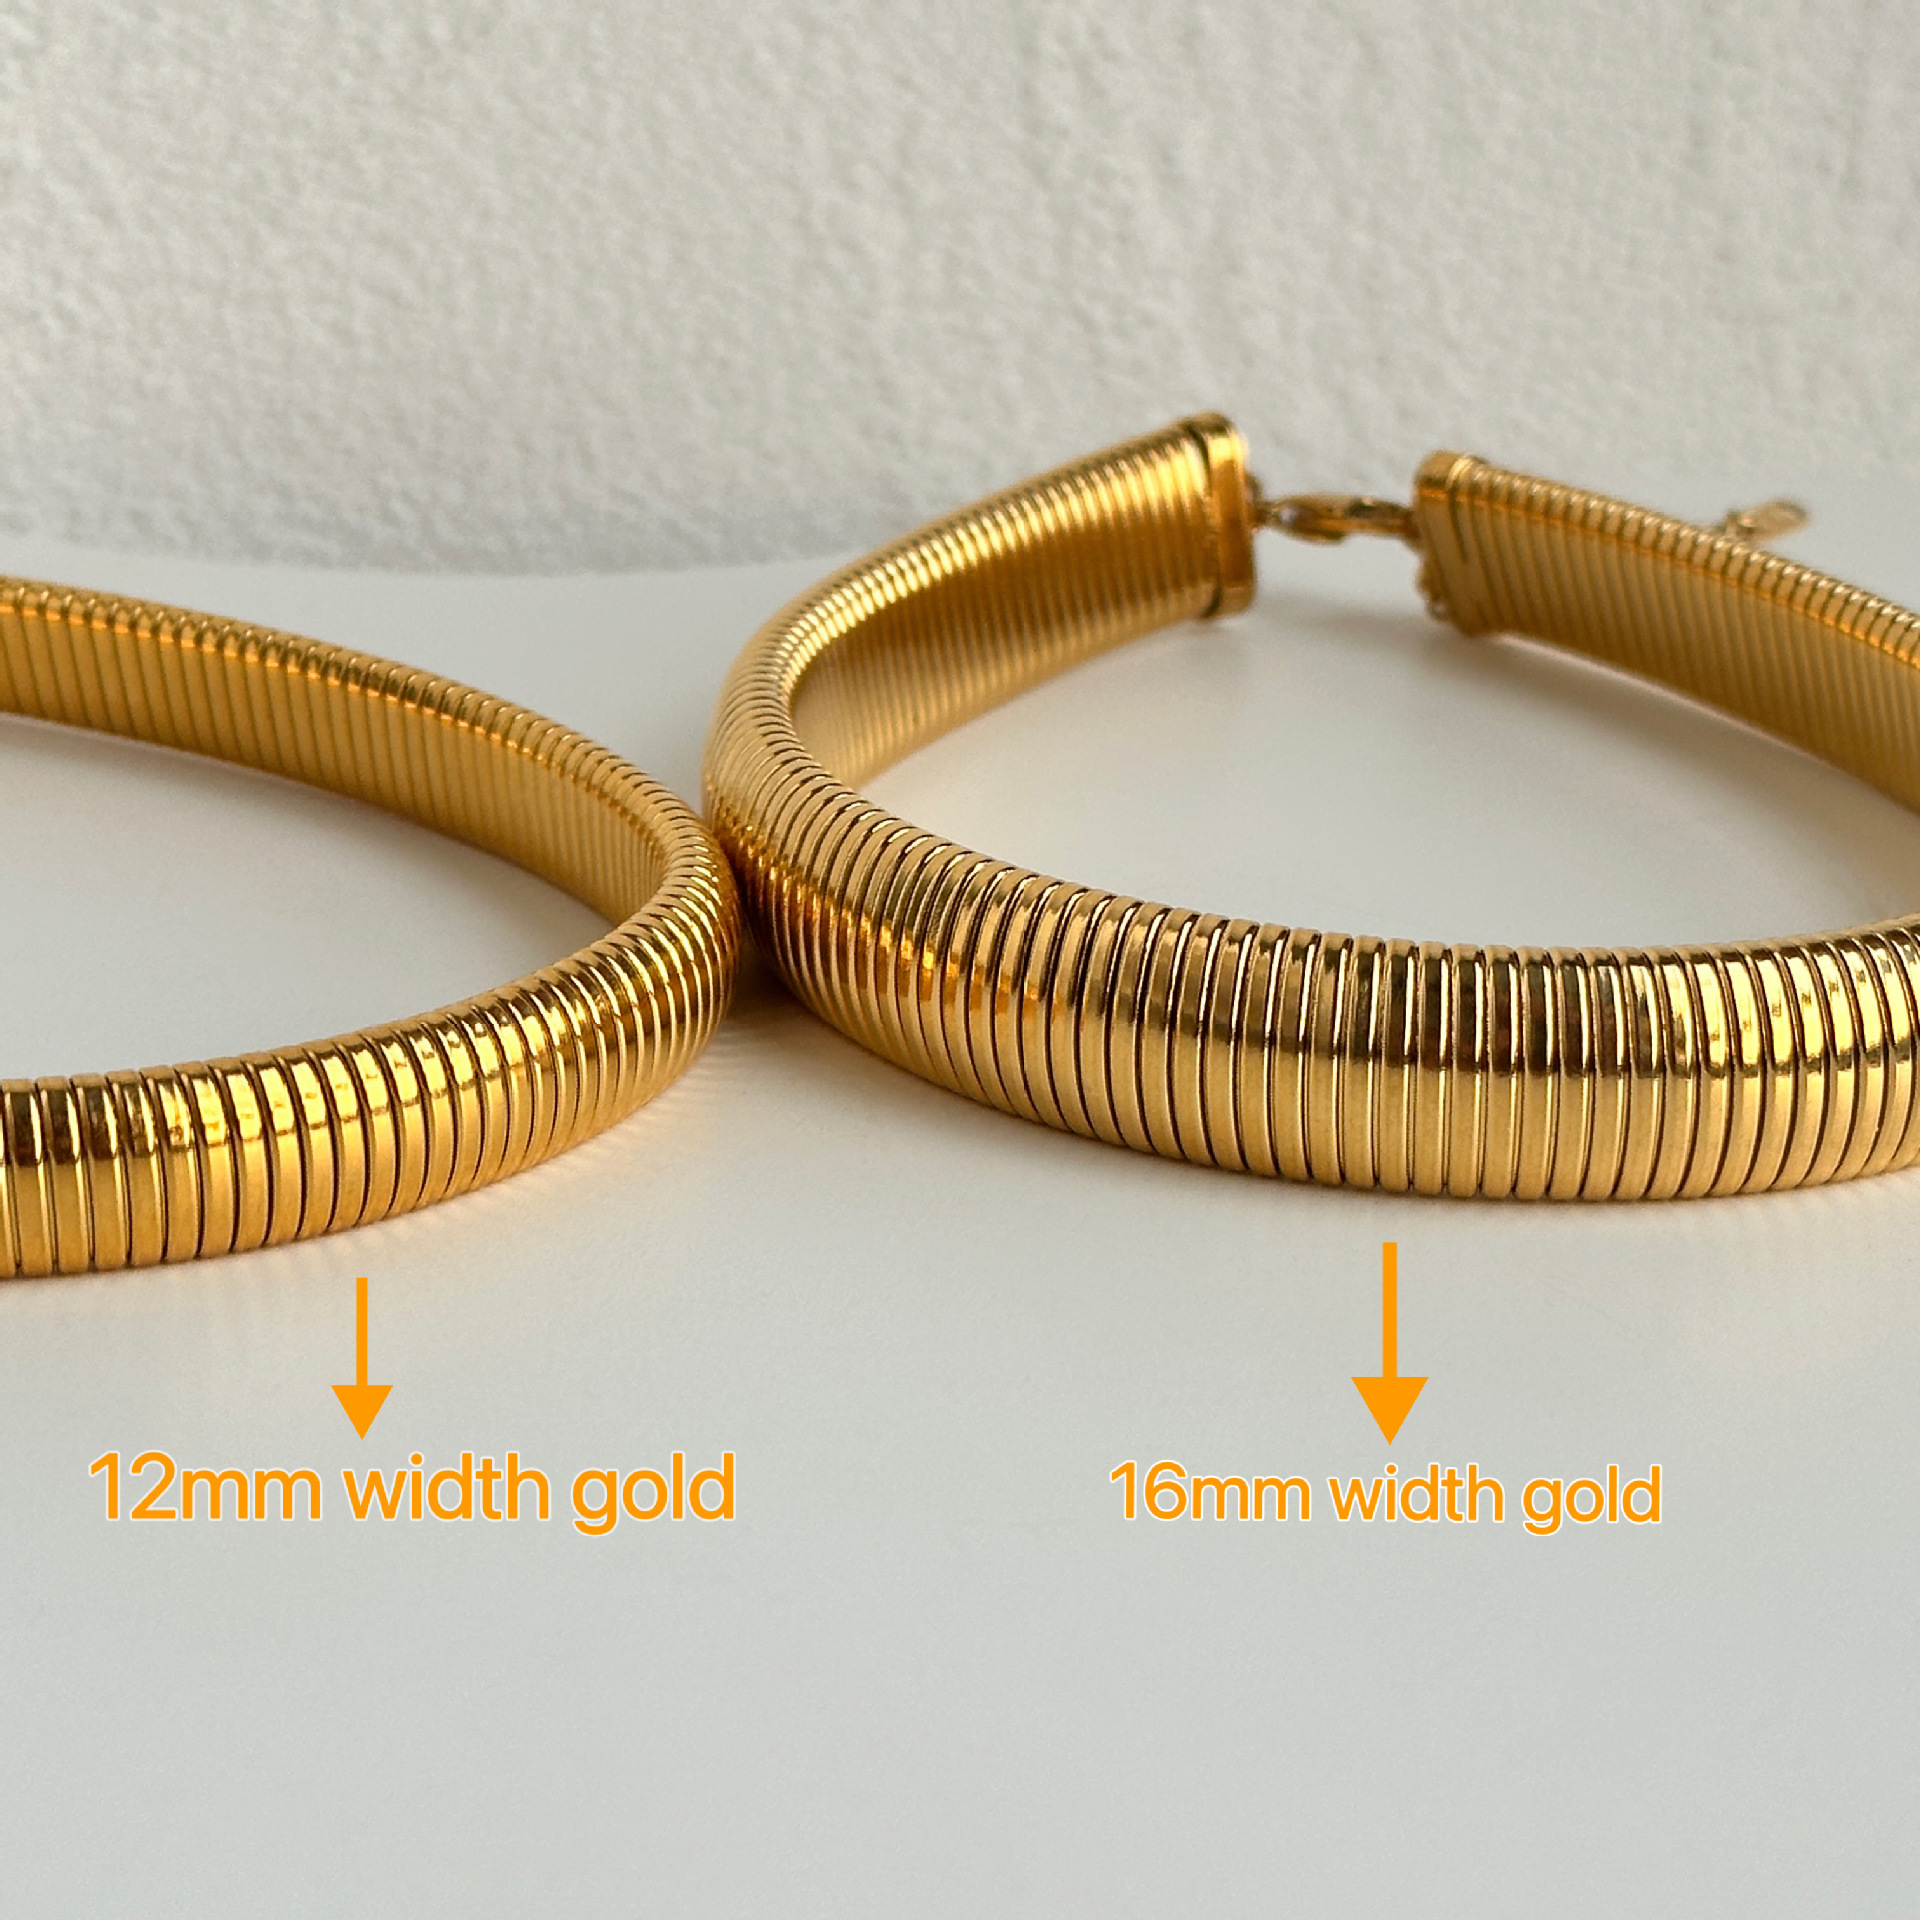 2:16mm wide, gold